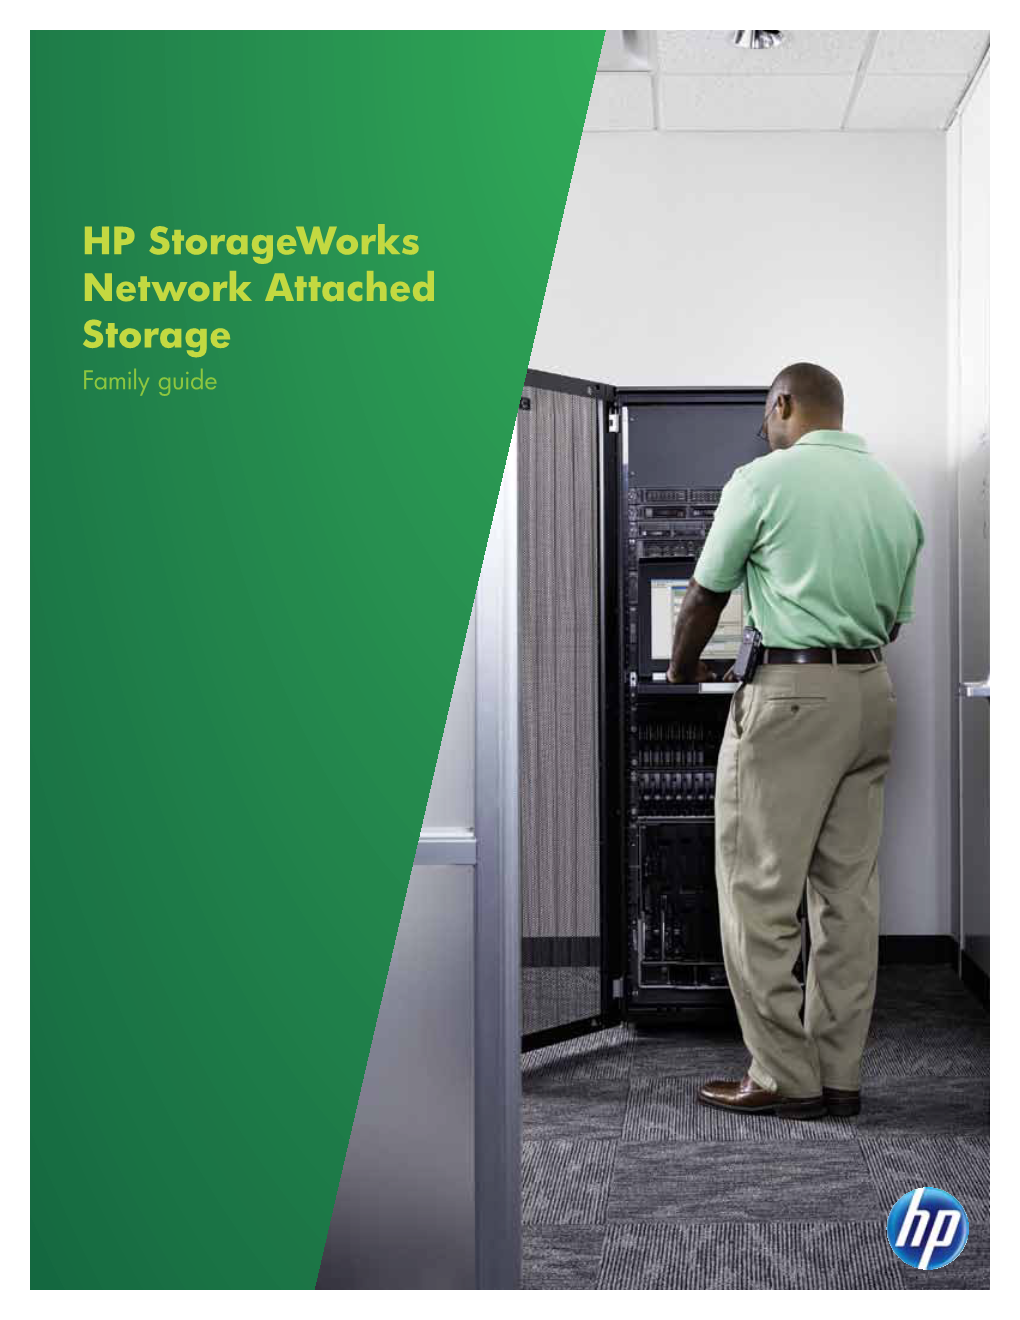 HP Storageworks Network Attached Storage Family Guide (US English)